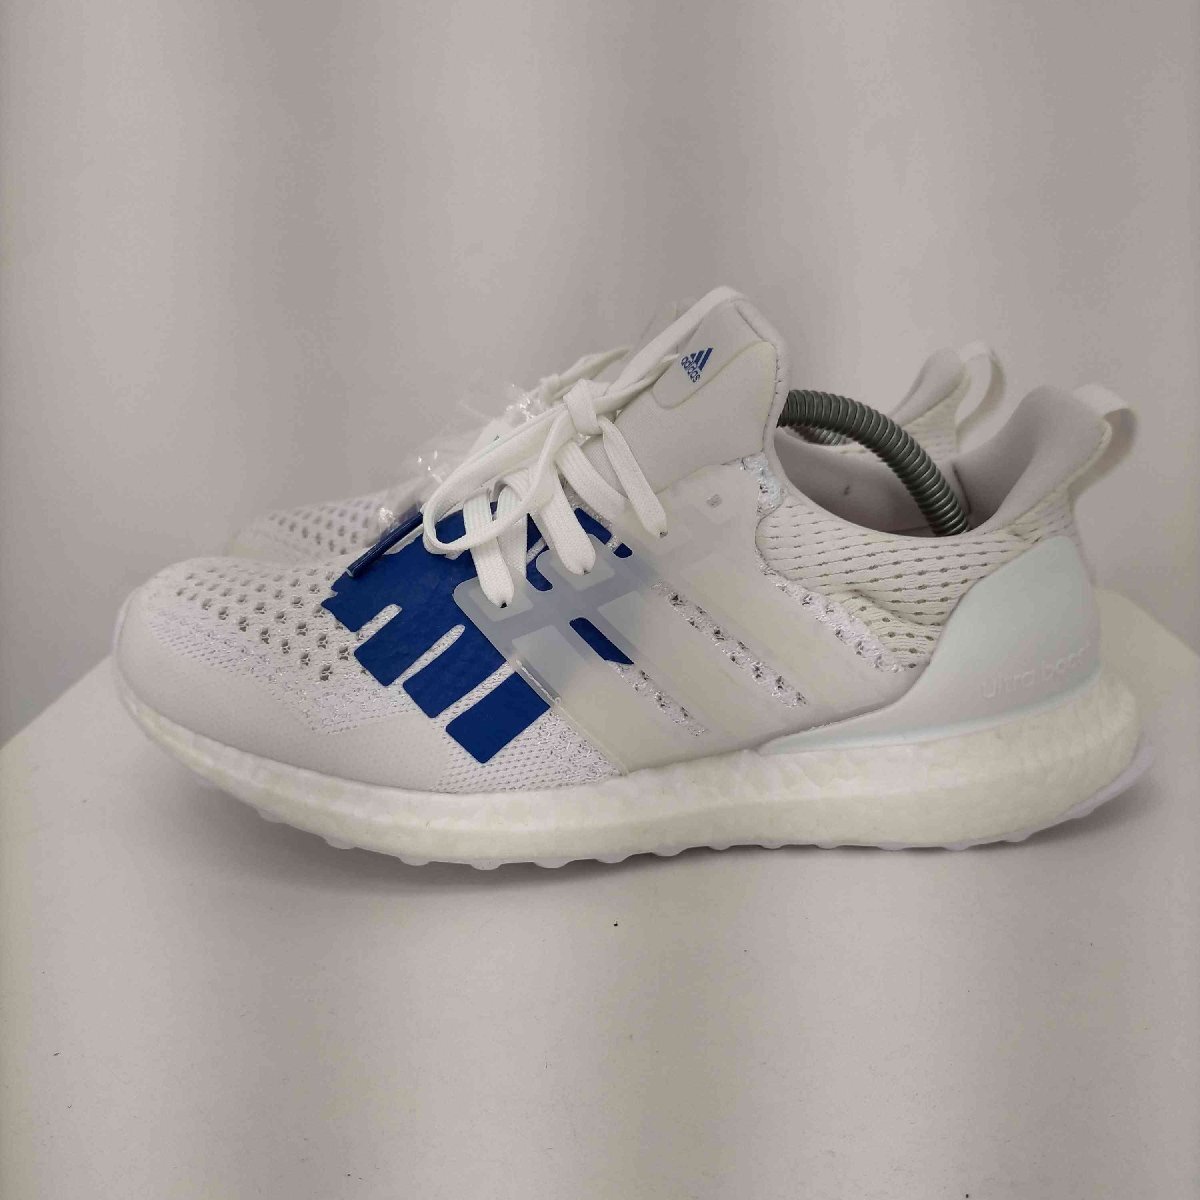 adidas(アディダス) ULTRA BOOST 1.0 UNDEFEATED STARS AND ST 中古 古着 0744_画像2